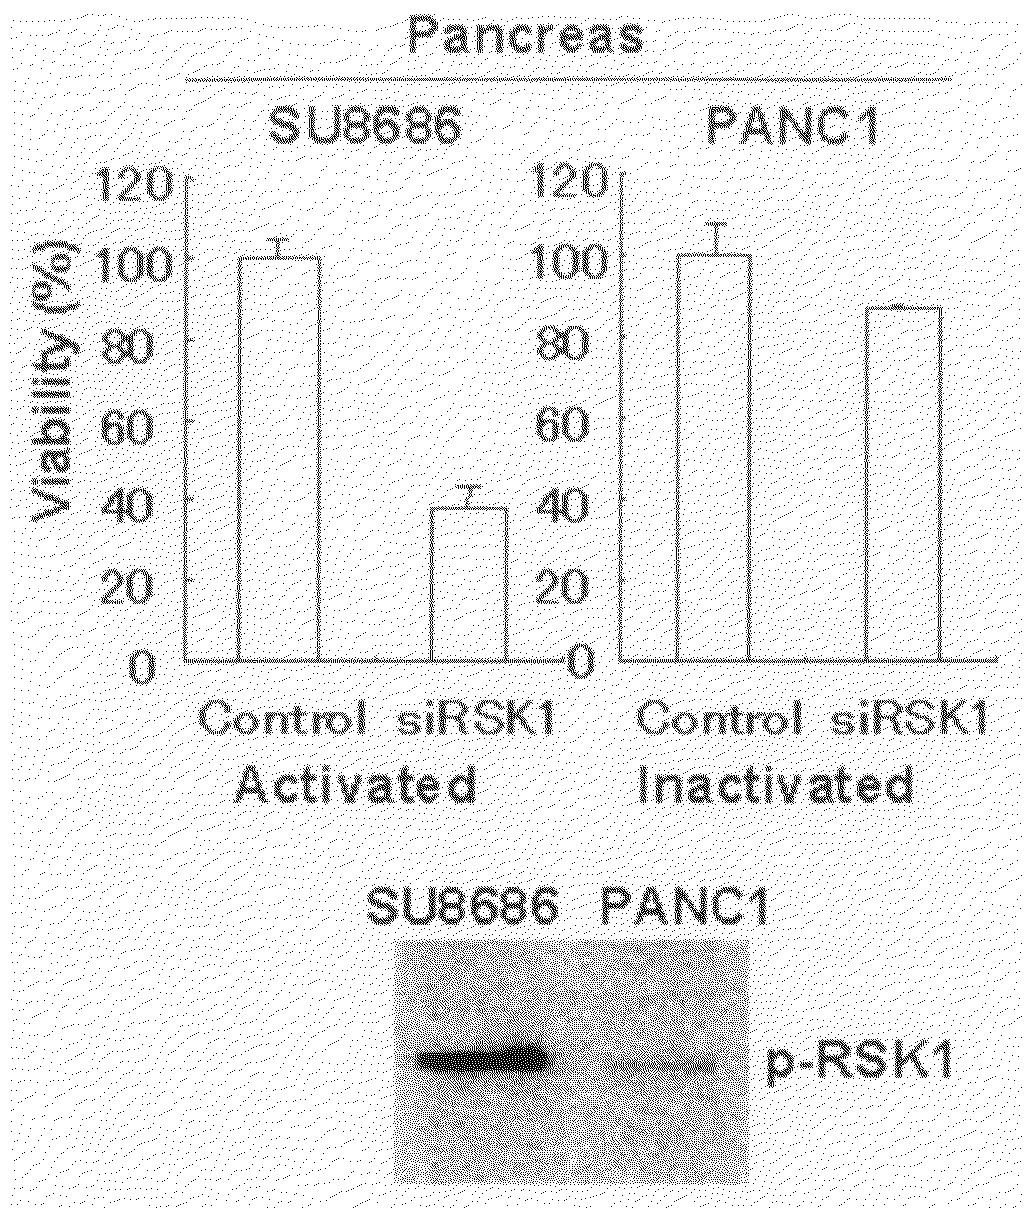 Method for evaluation of compound using RSK1